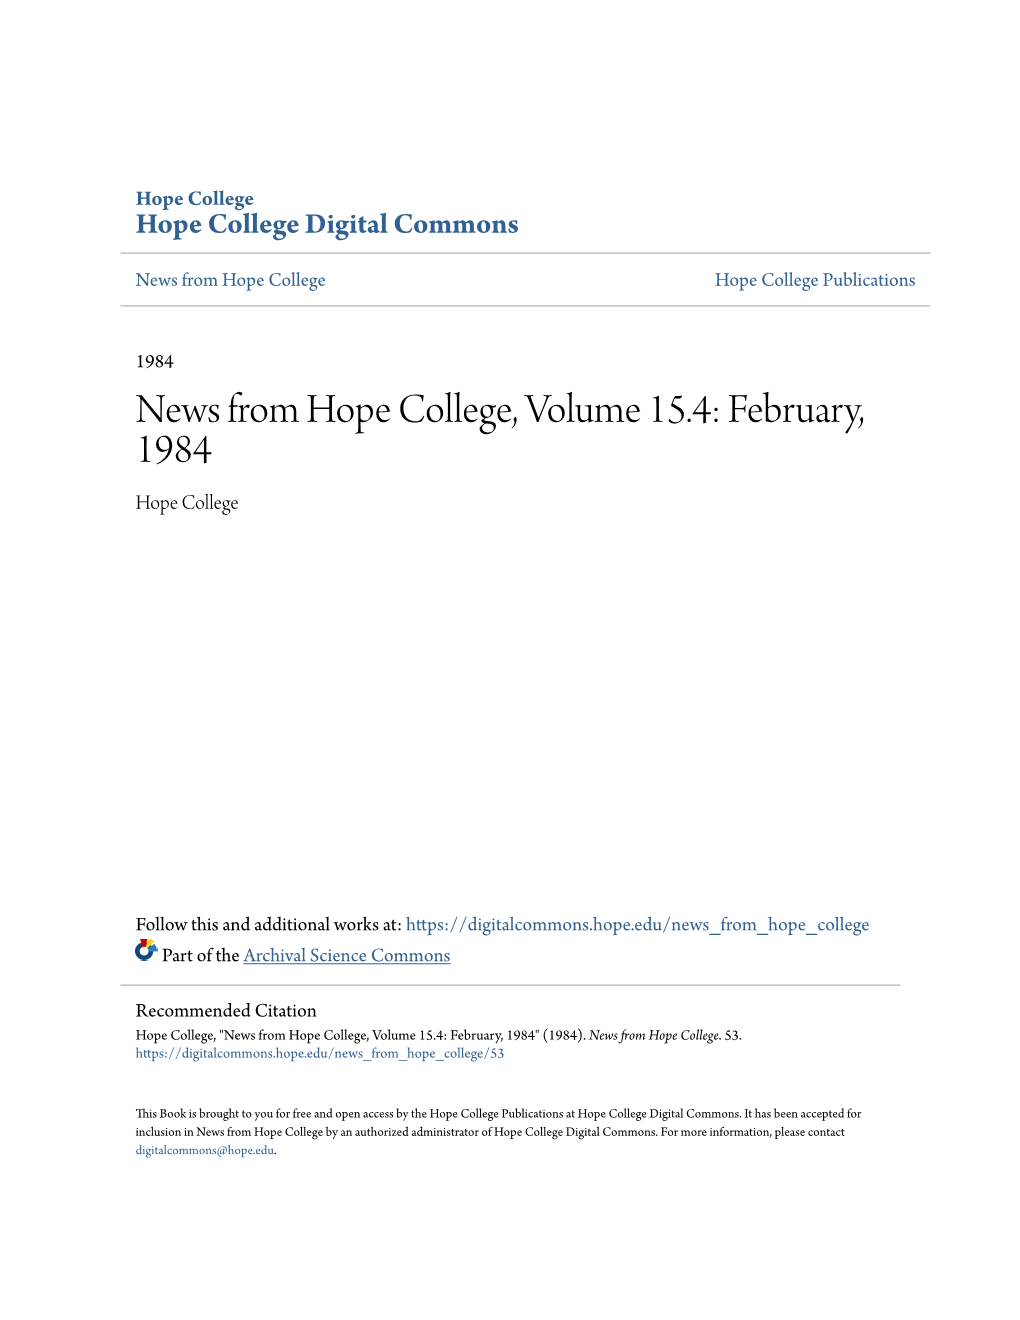 News from Hope College, Volume 15.4: February, 1984 Hope College